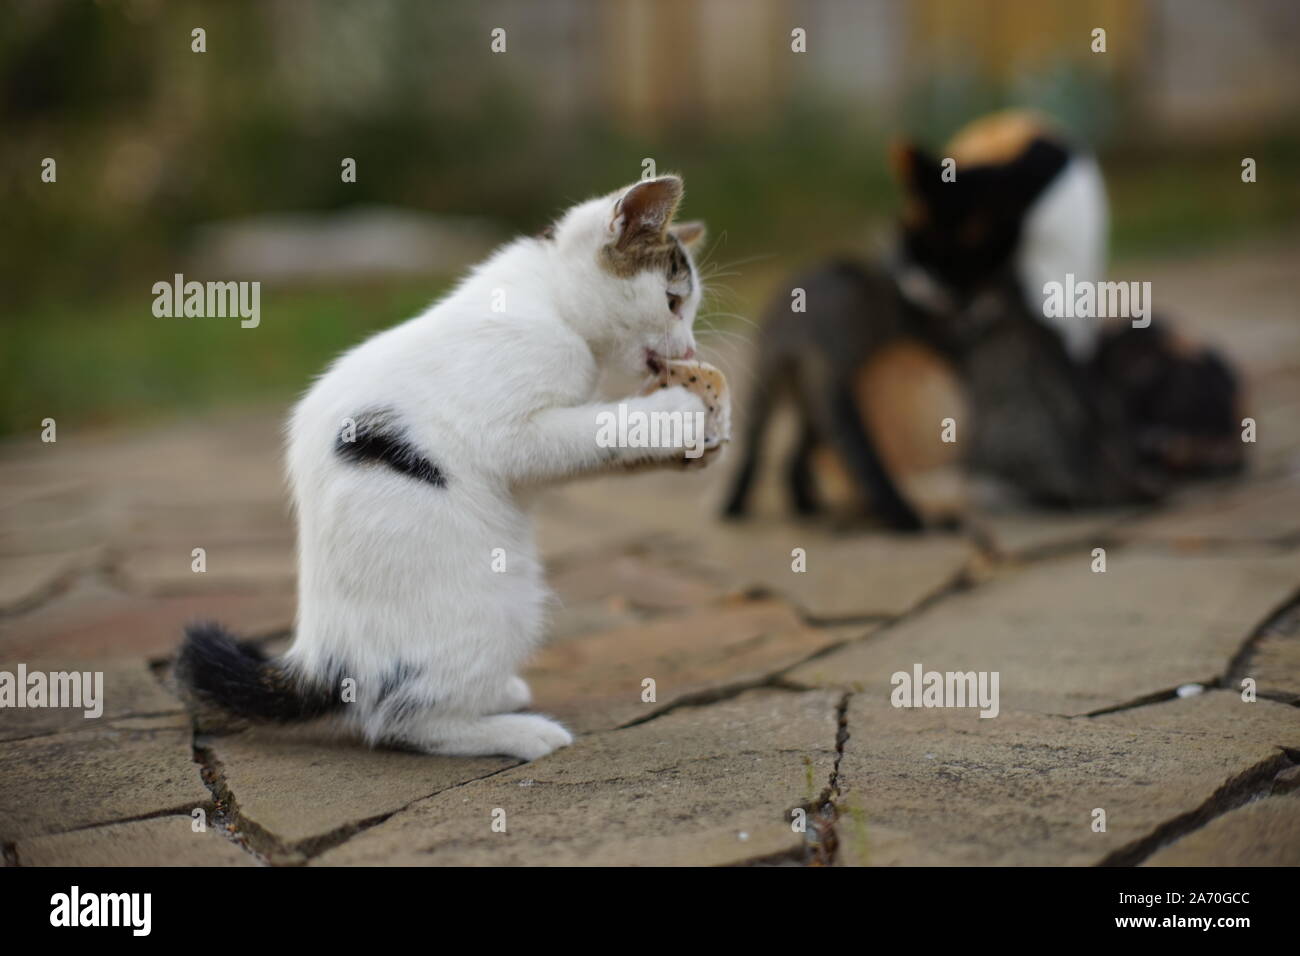 Spotted white kitten sits in the garden in a funny pose, cat eats fat comically. Stock Photo